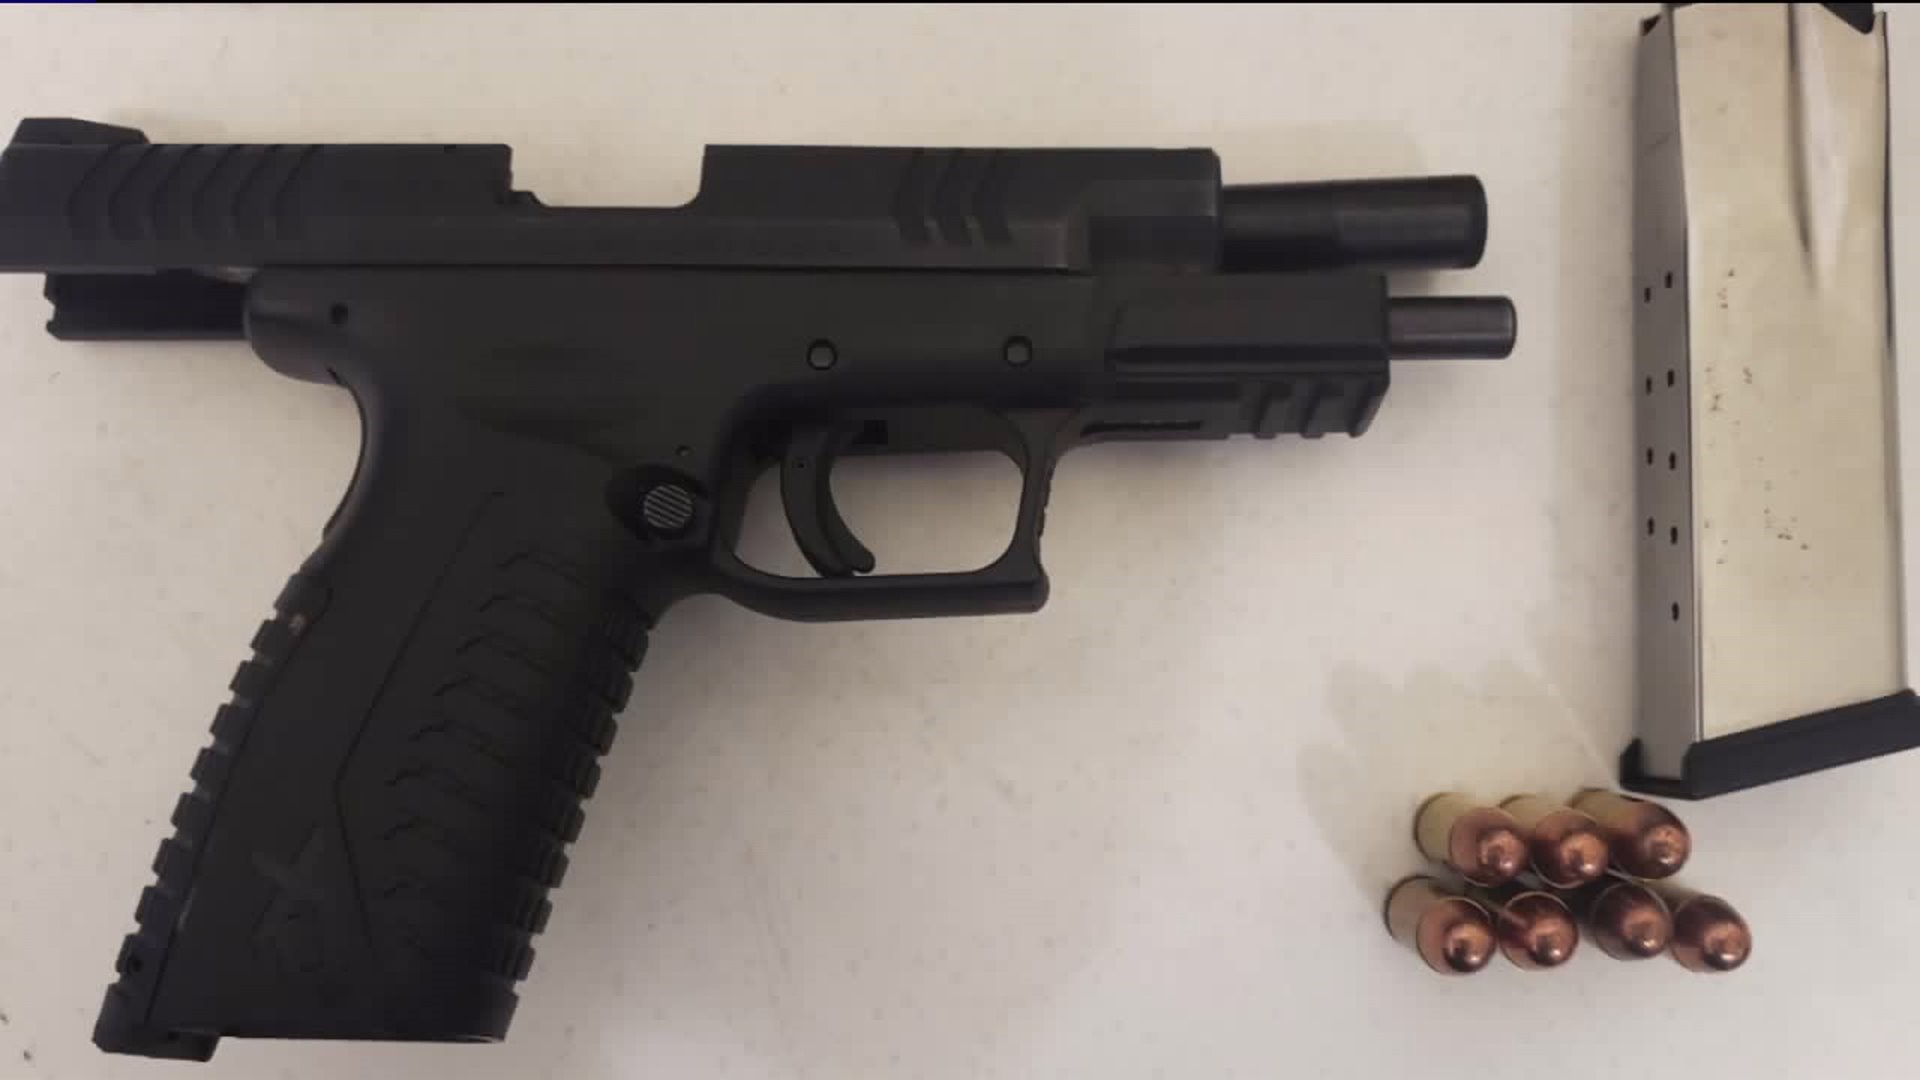 Loaded Gun Found in Carry-on Bag at W-B/Scr International Airport